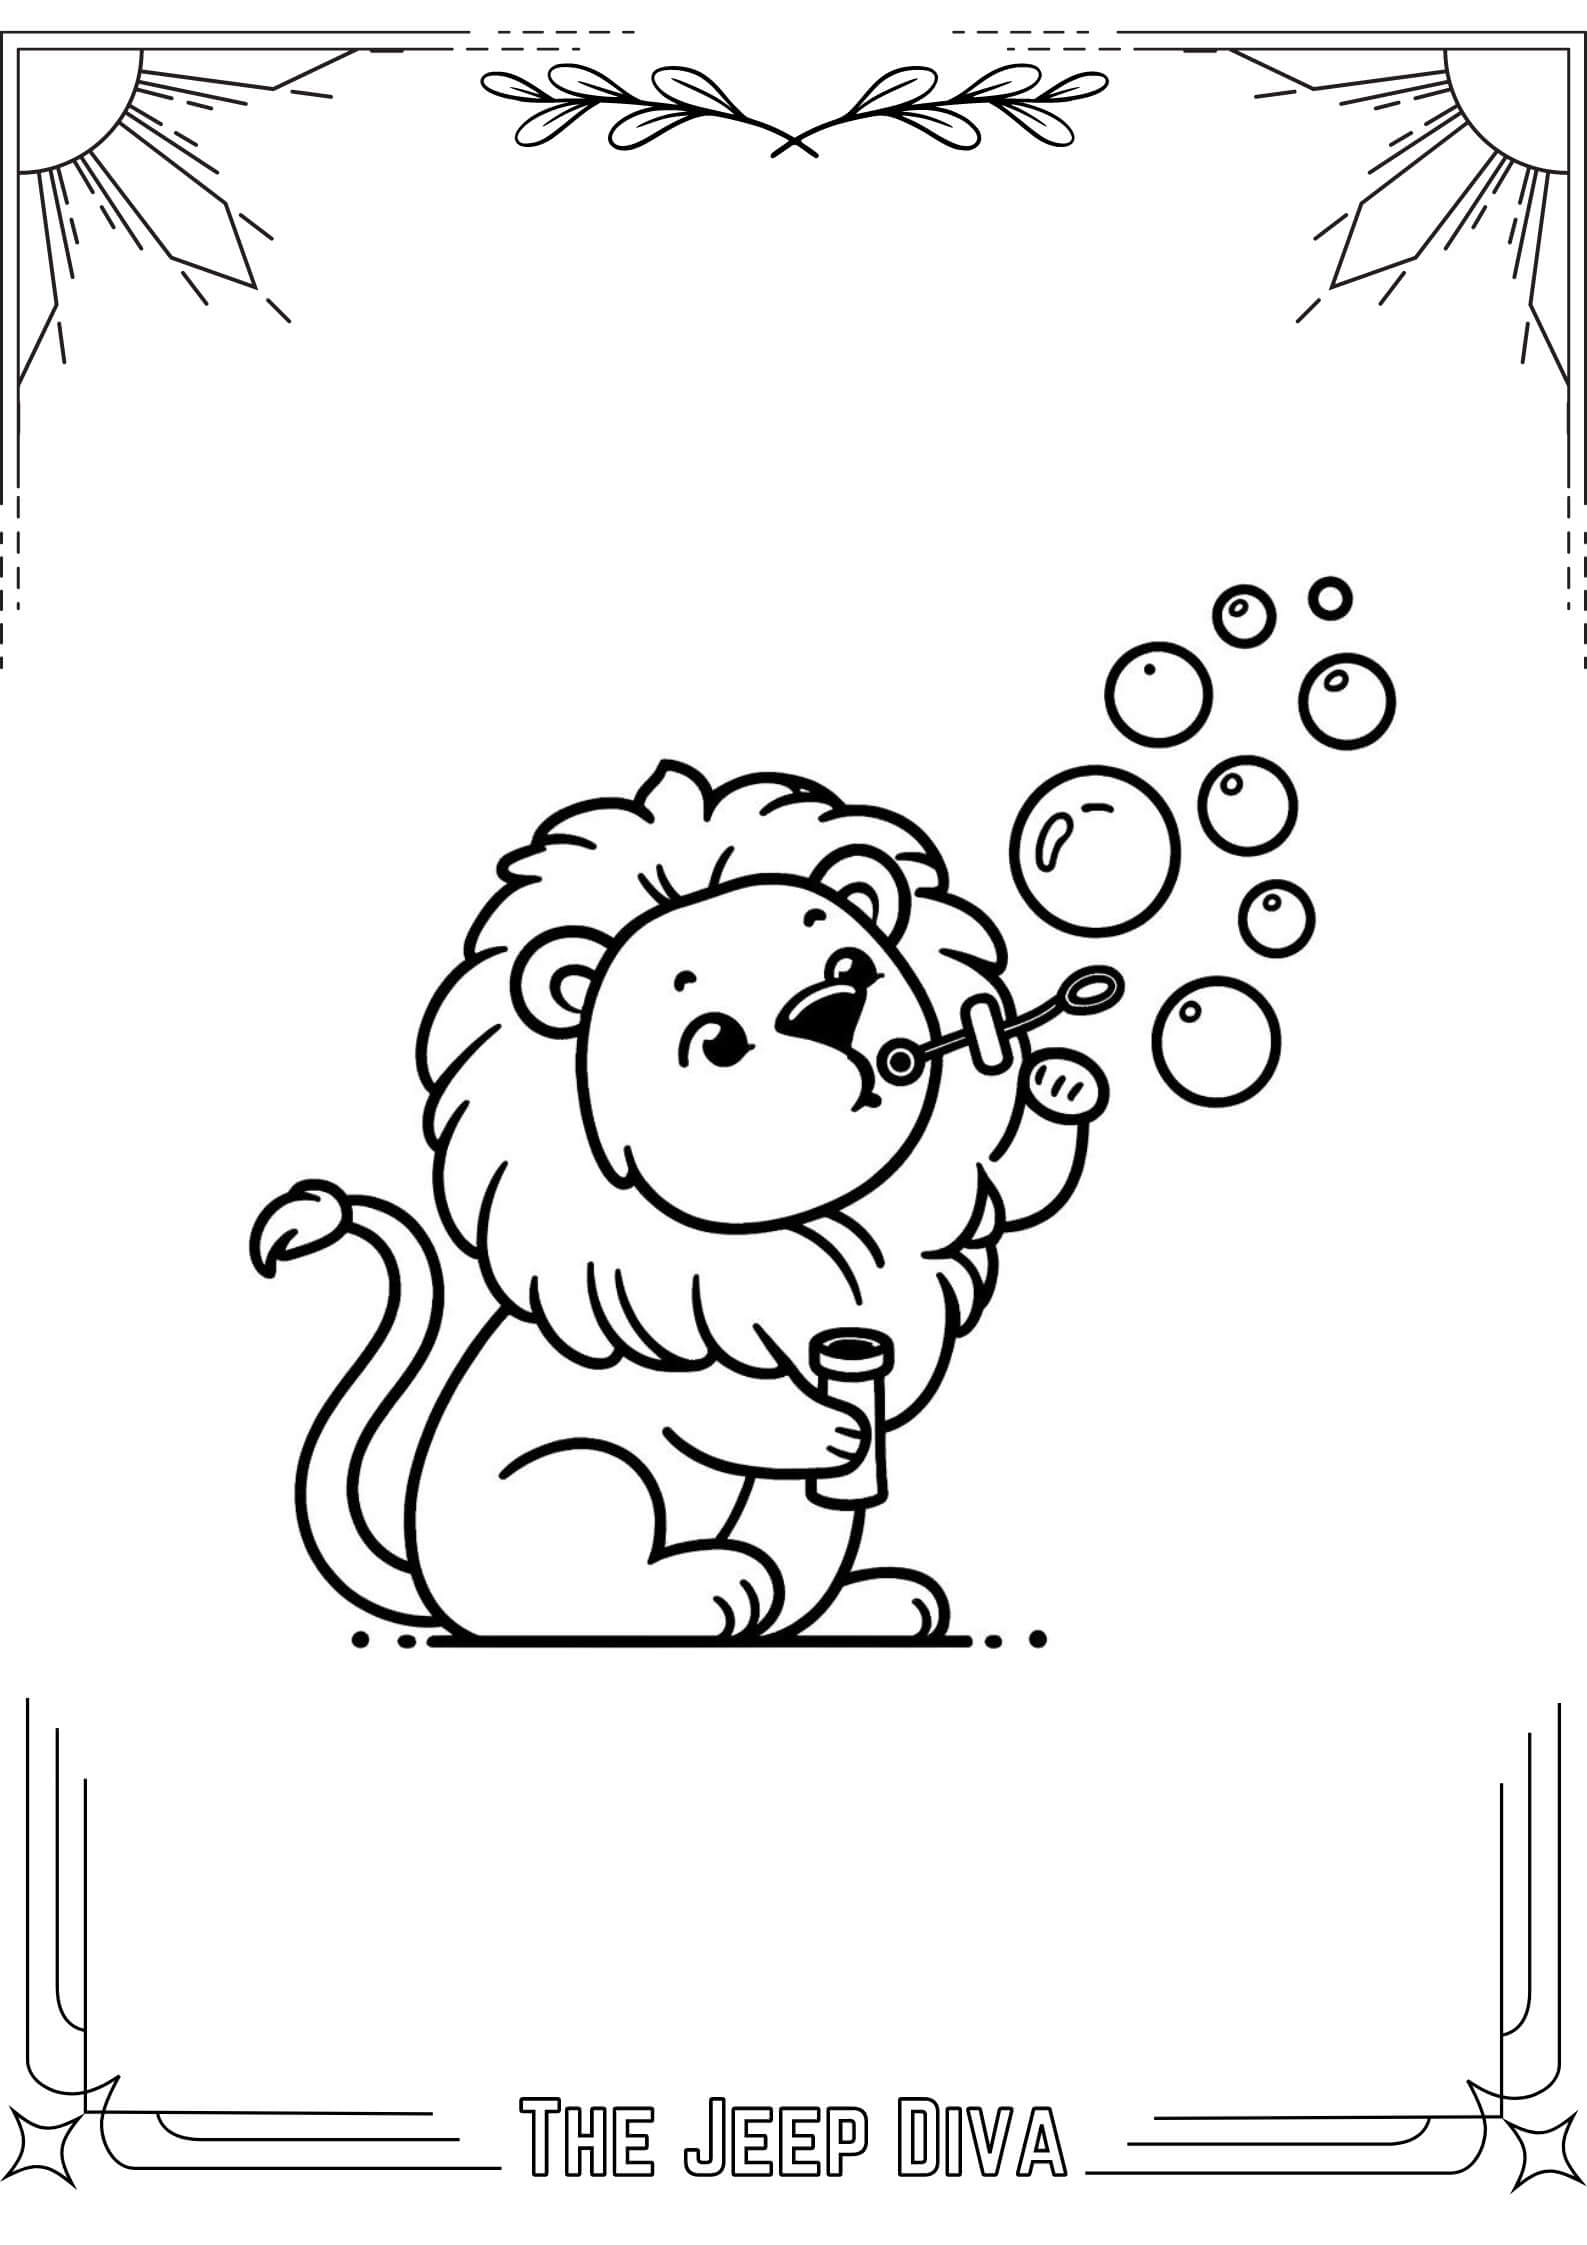 The Jeep Diva Coloring Page Lion Medium Difficulty 5